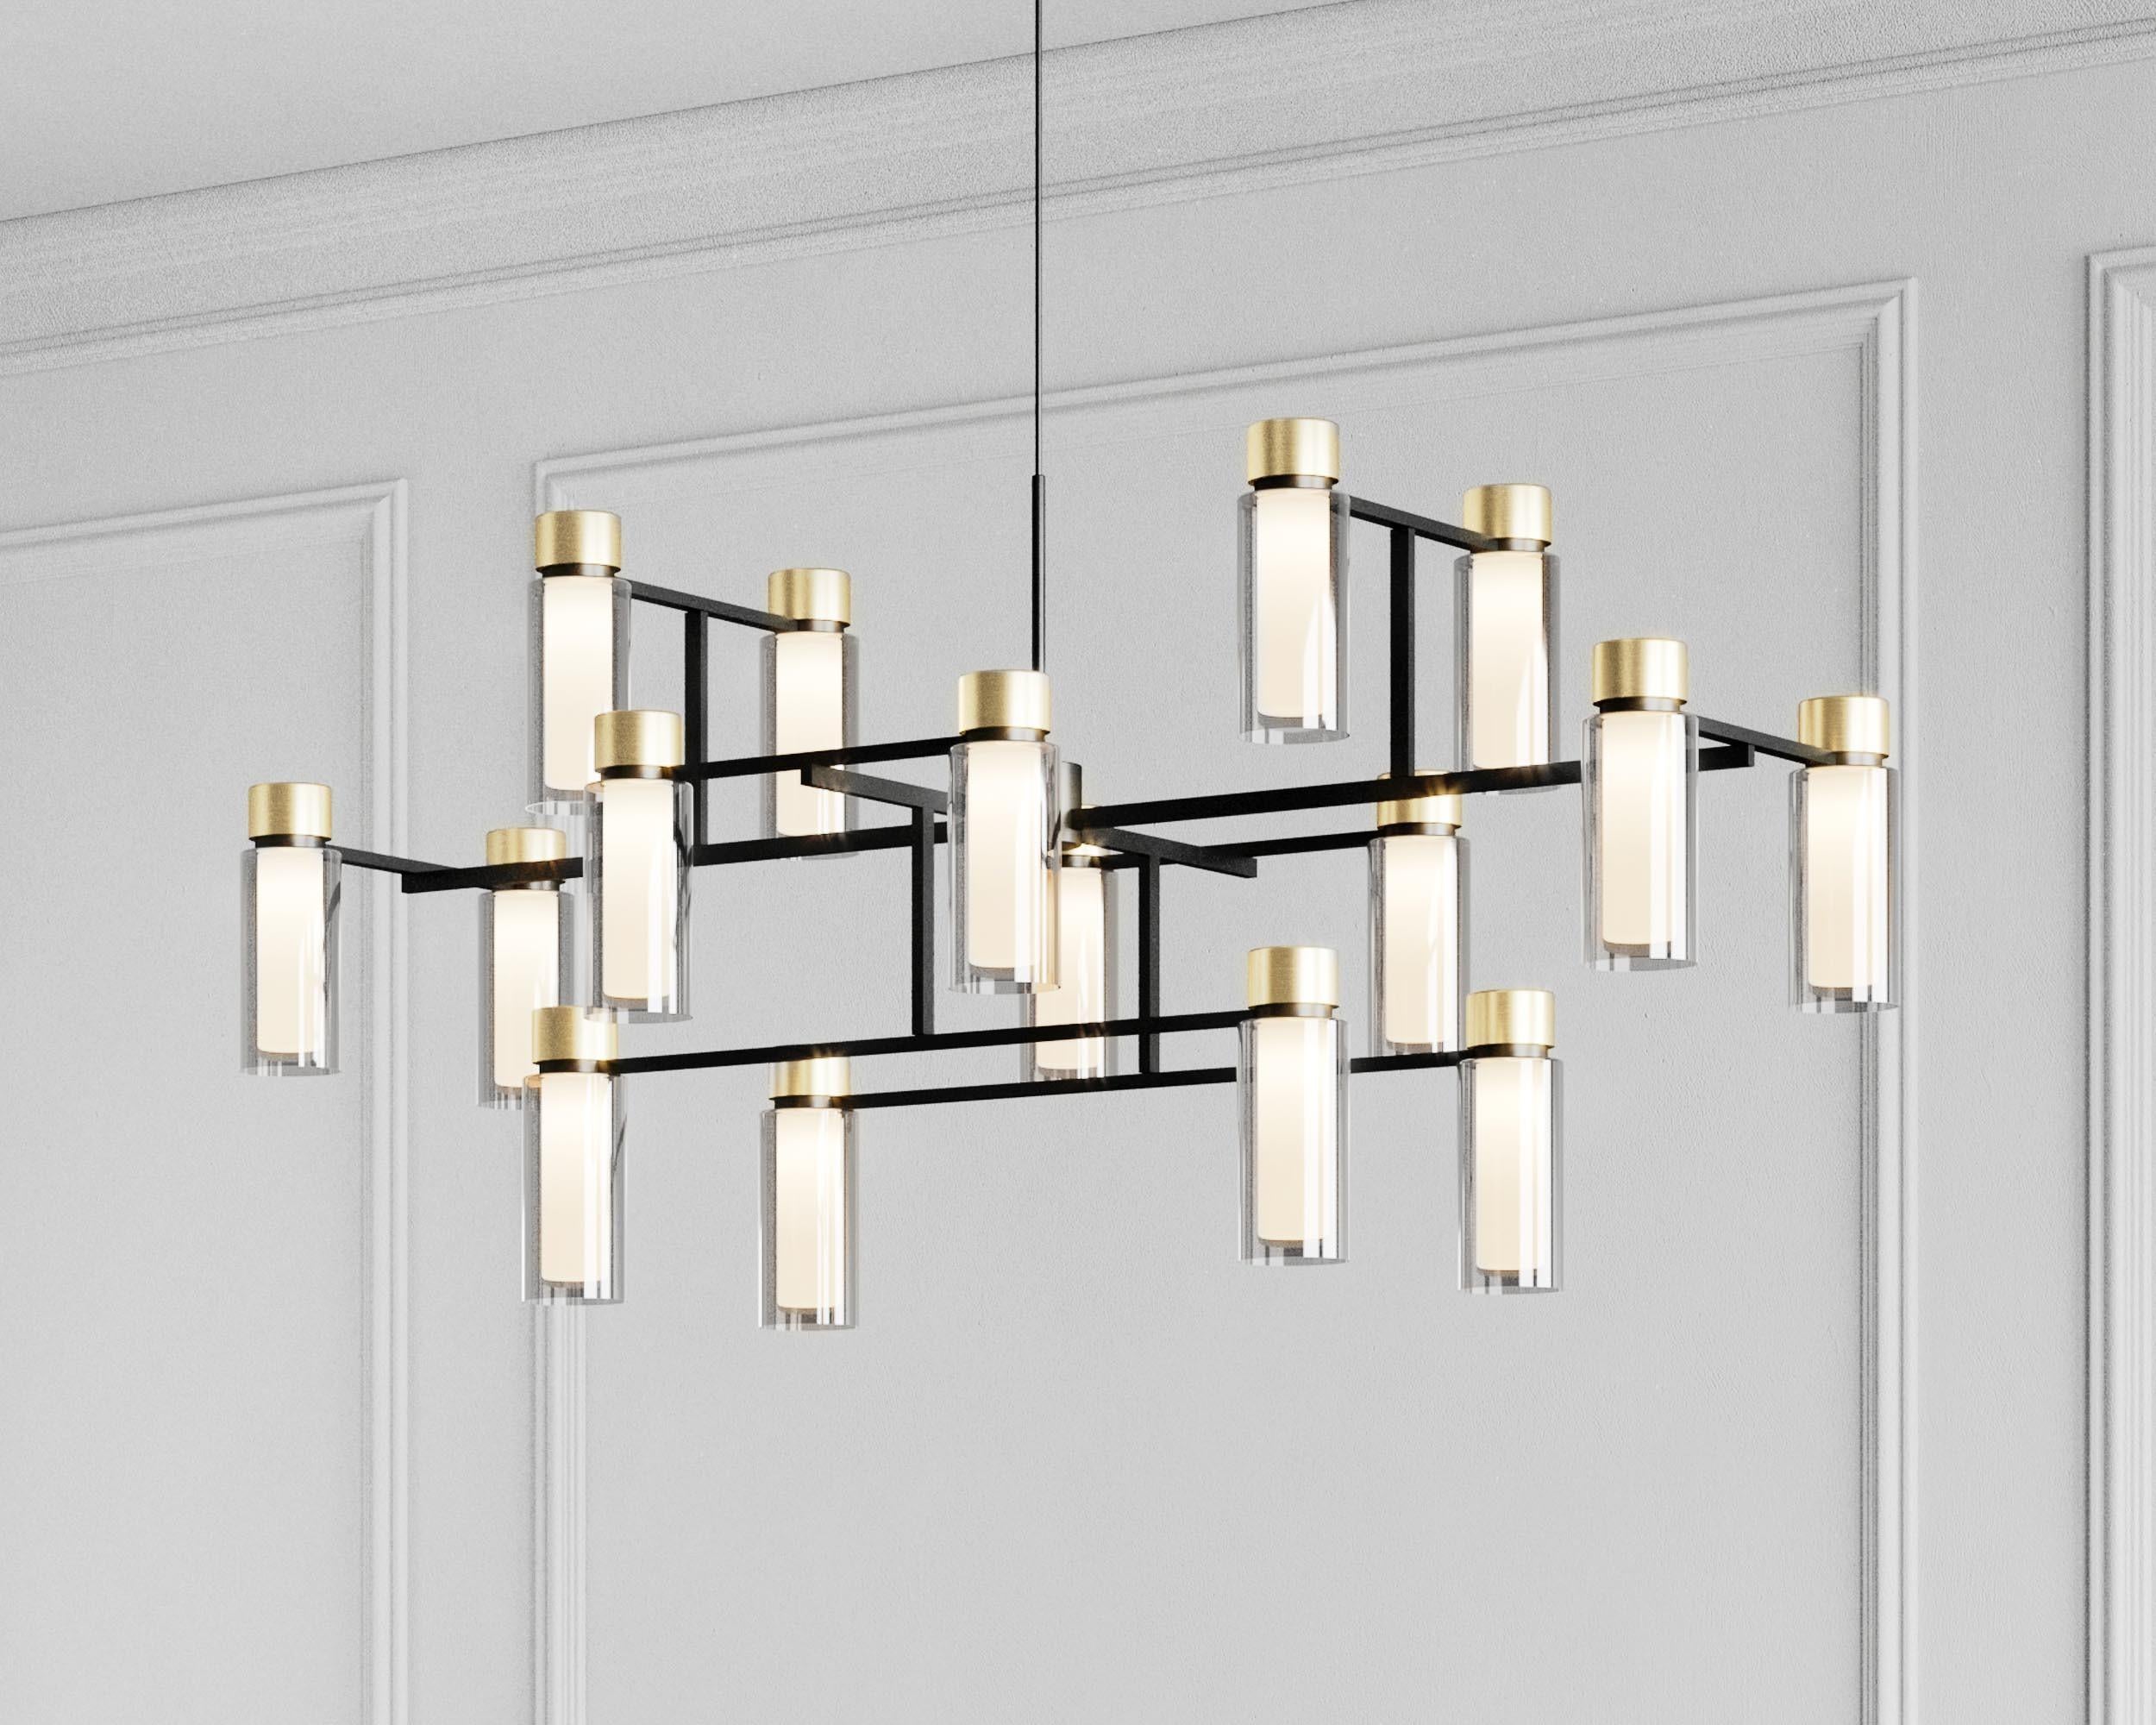 Chandelier Osman 560.16 by Corrado Dotti x TOOY
16 Lights

Model shown:
Finish: Brushed brass
Color: Clear glass

Lighting source : 16 x E14 220/240V Compliant with US electric system

Pendant: Cable length 60 / 90 cm. 

50s Inspired collection of